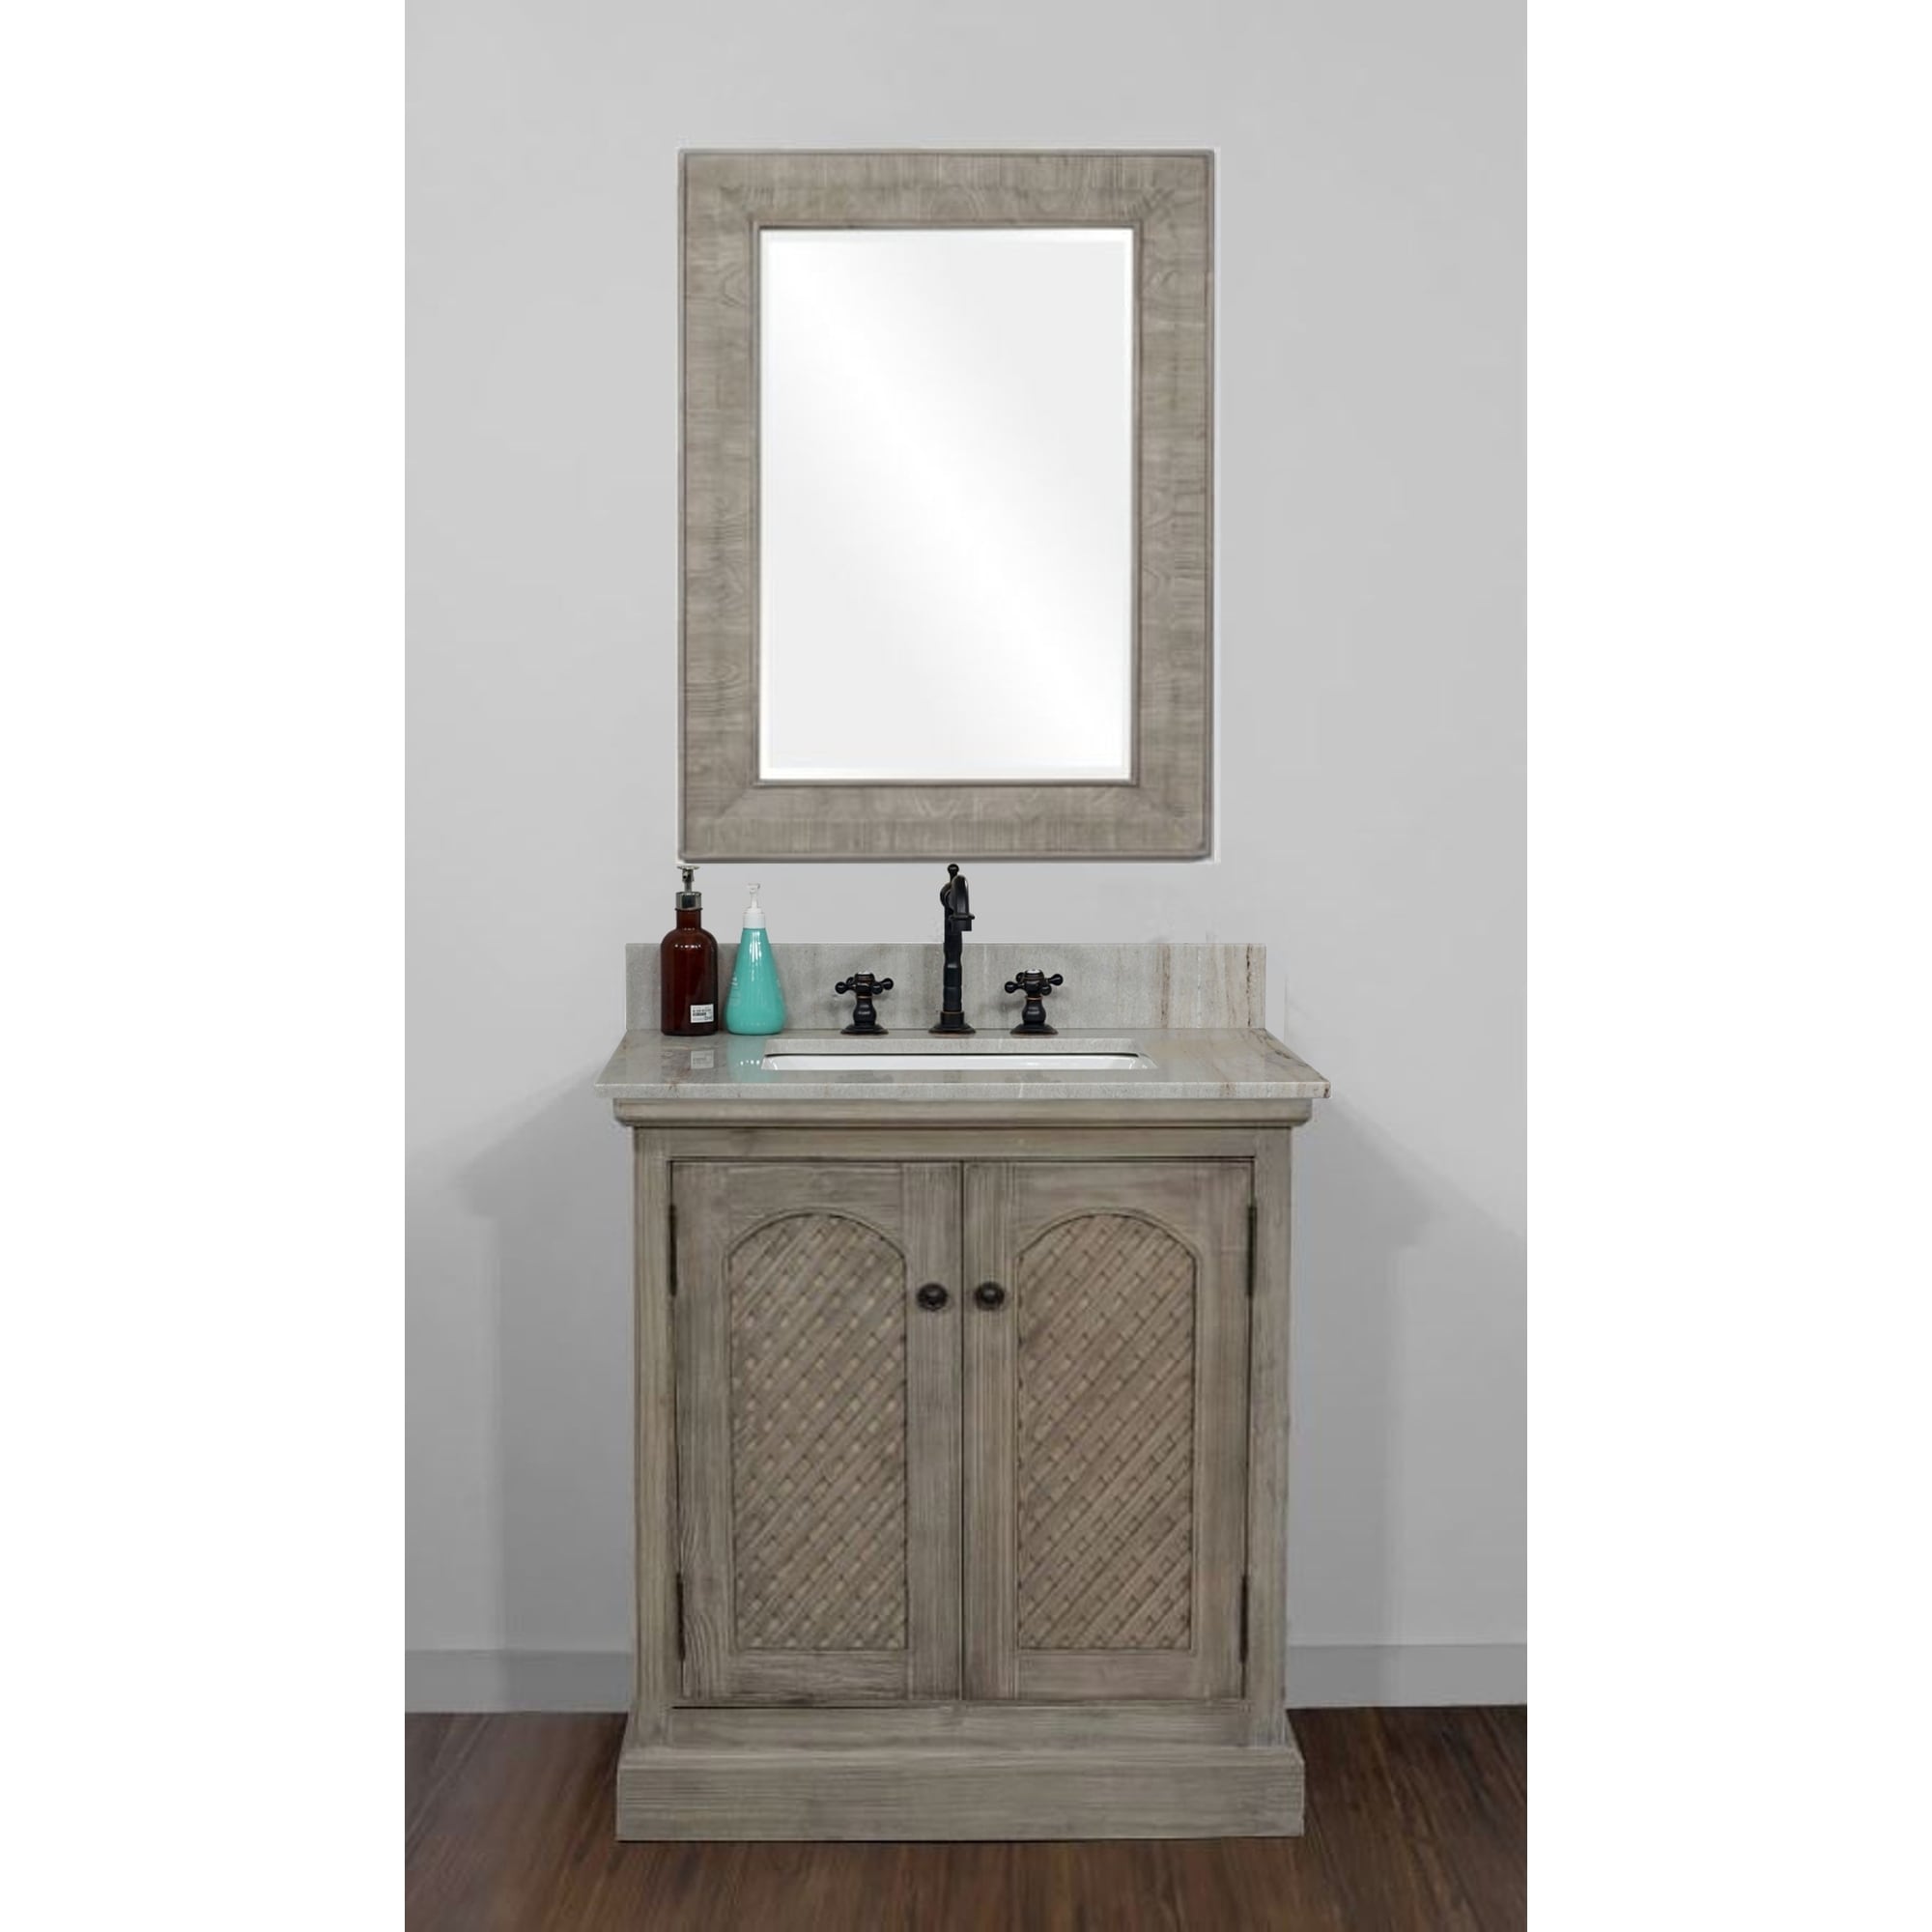 Rustic Style 31 Inch Single Sink Bathroom Vanity With Coastal Sand Marble Top No Faucet Overstock 30570072 Driftwood